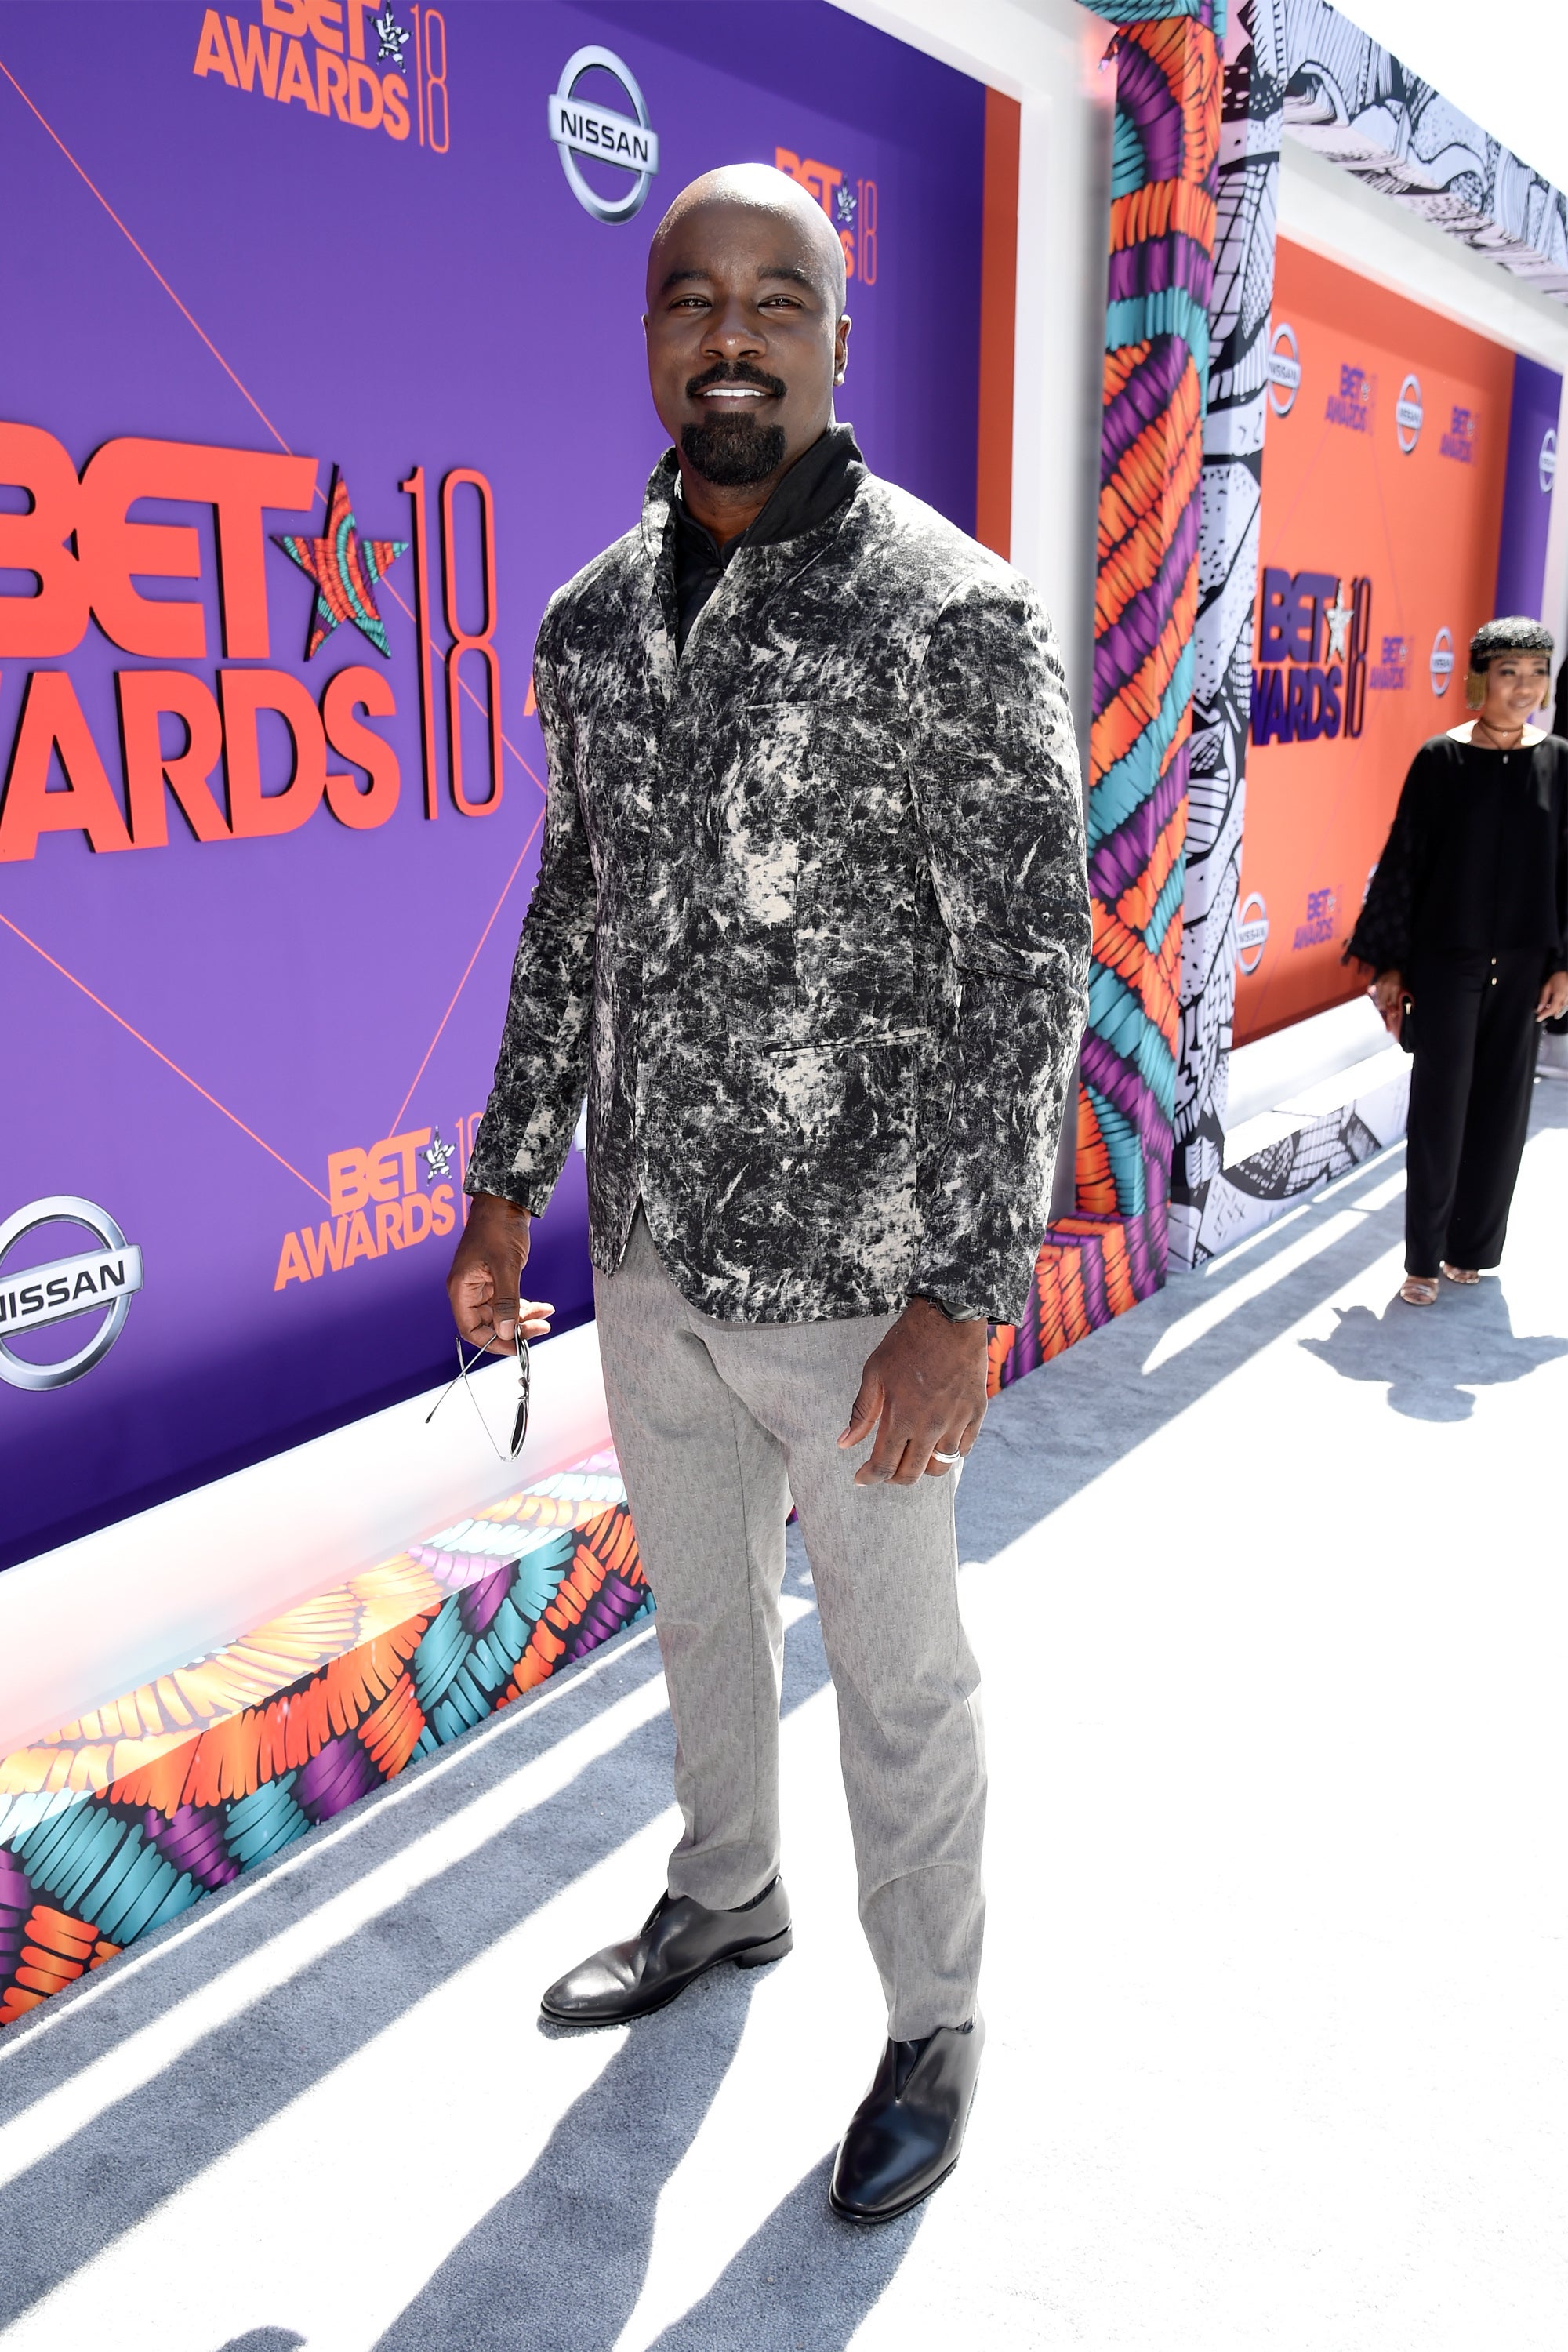 The Biggest And Brightest Black Stars Hit The 2018 BET Awards Red Carpet Looking Lovely
